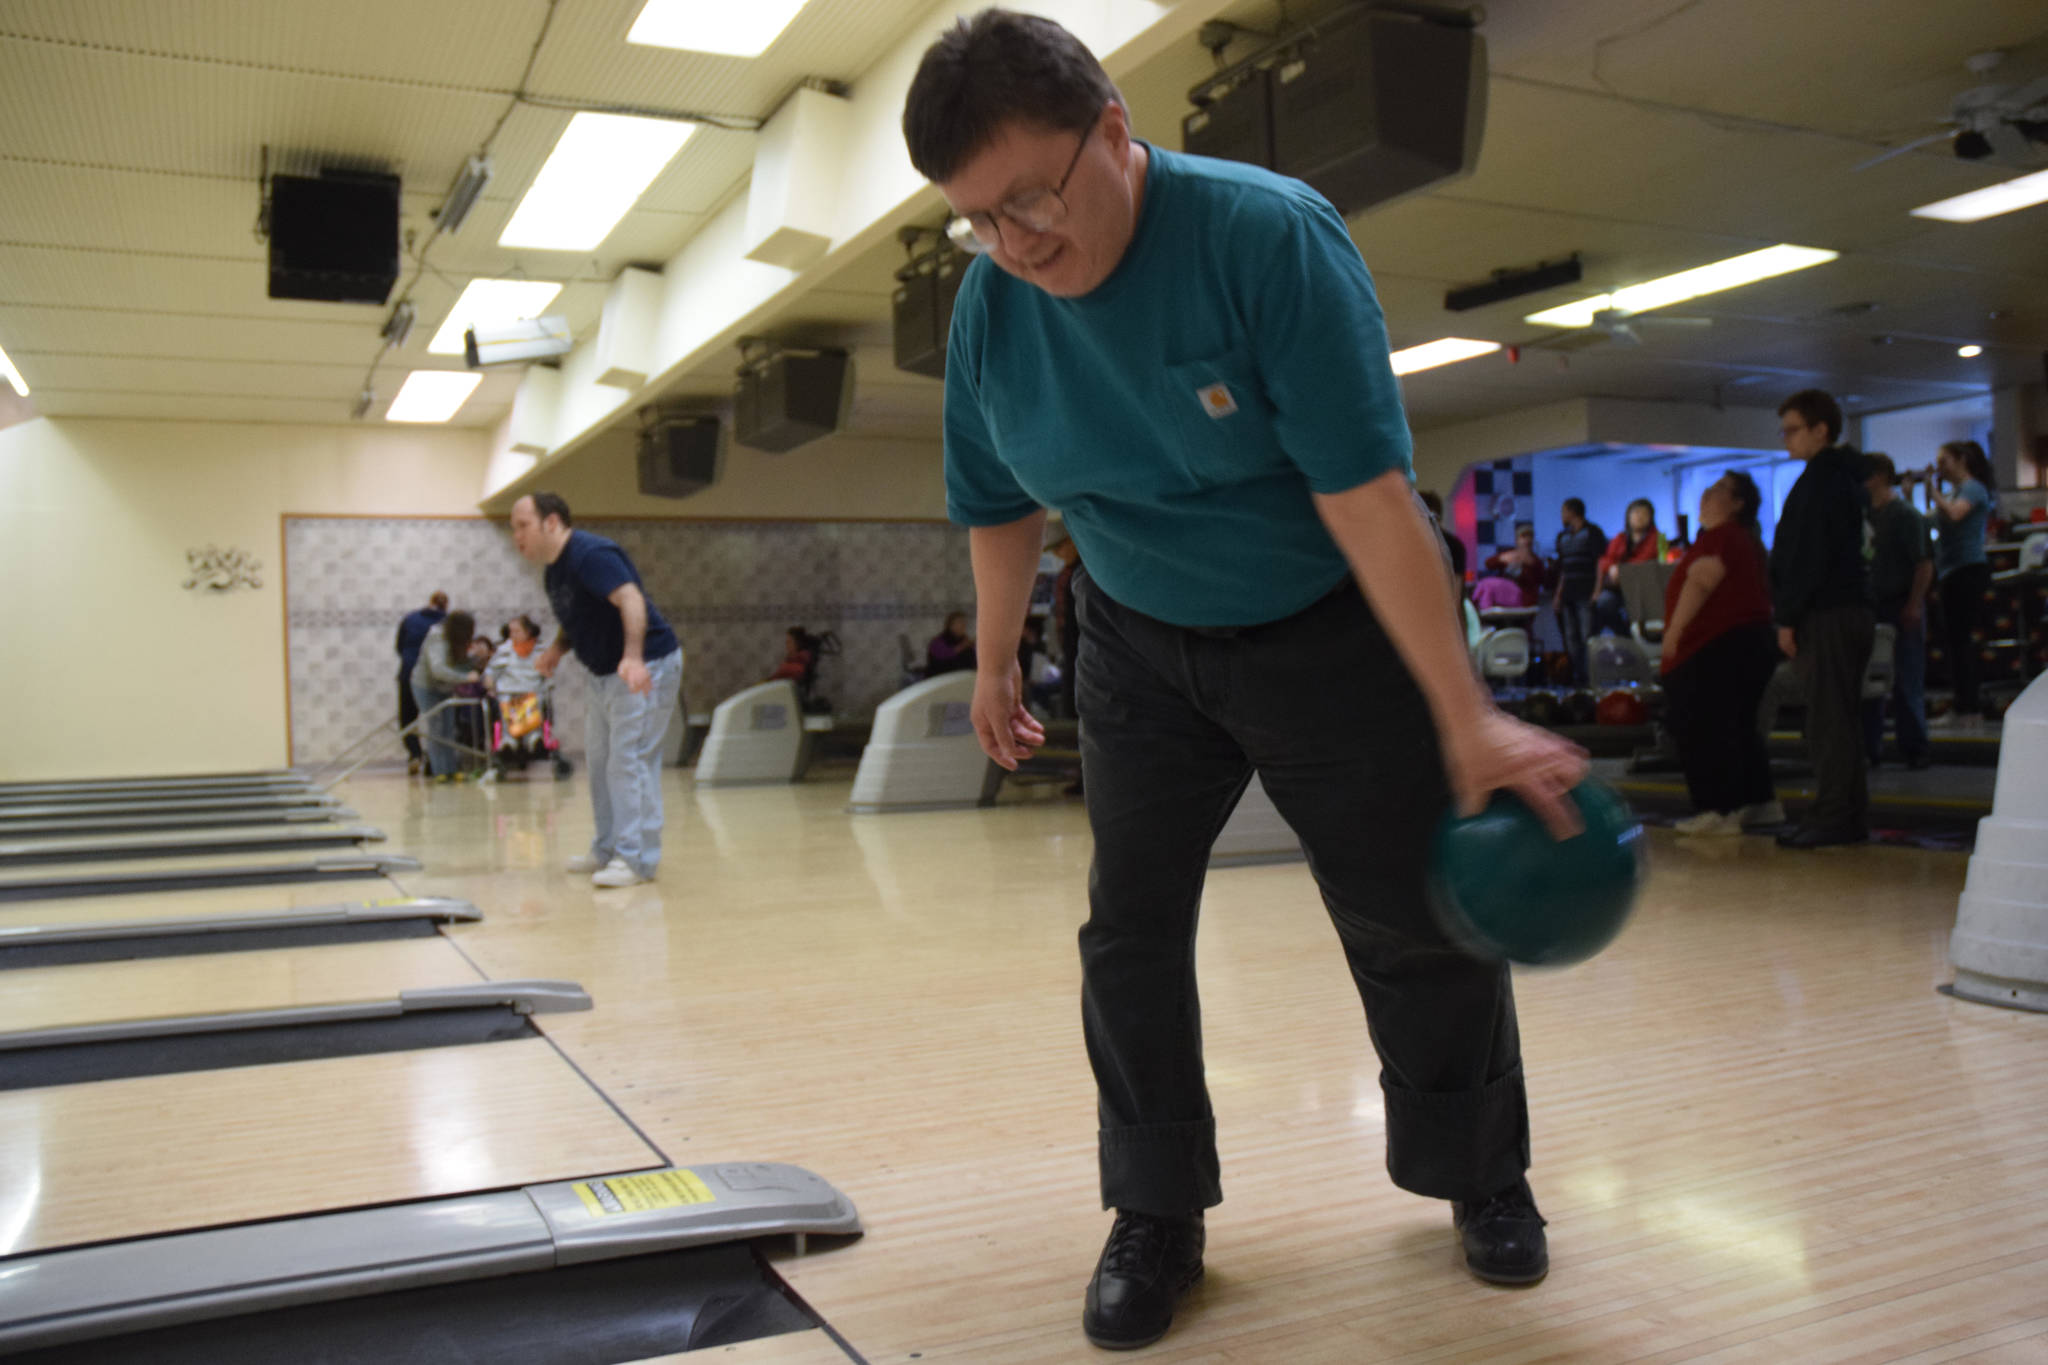 Special Olympics athletes take their turns bowling at a practice at Taku Lanes on Sunday, Oct. 15. (Kevin Gullufsen | Juneau Empire)